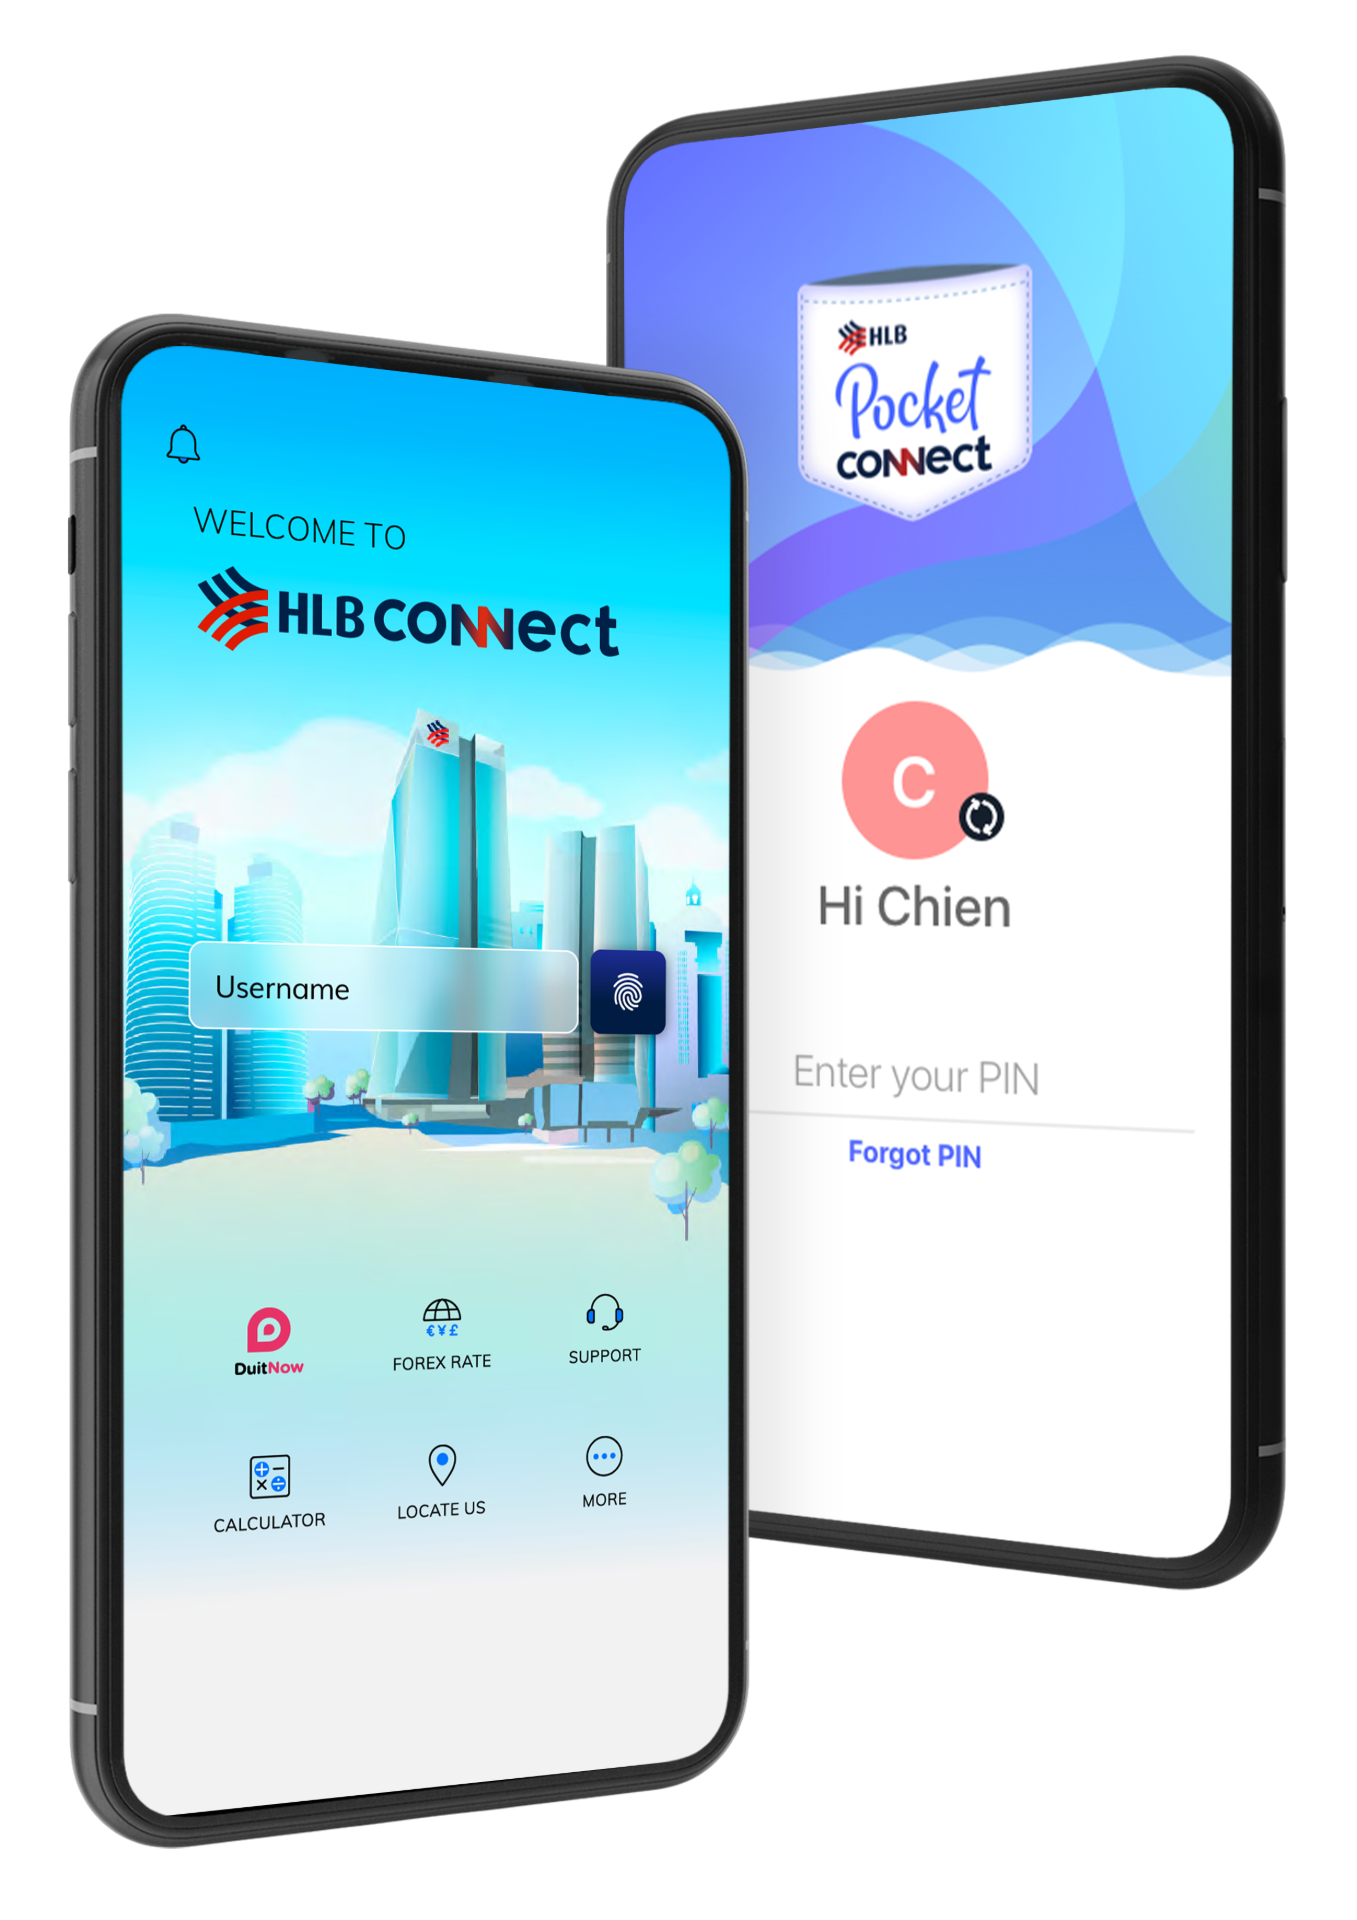 Hong Leong Bank introduces the first in market digital banking platform for young users called HLB Pocket Connect